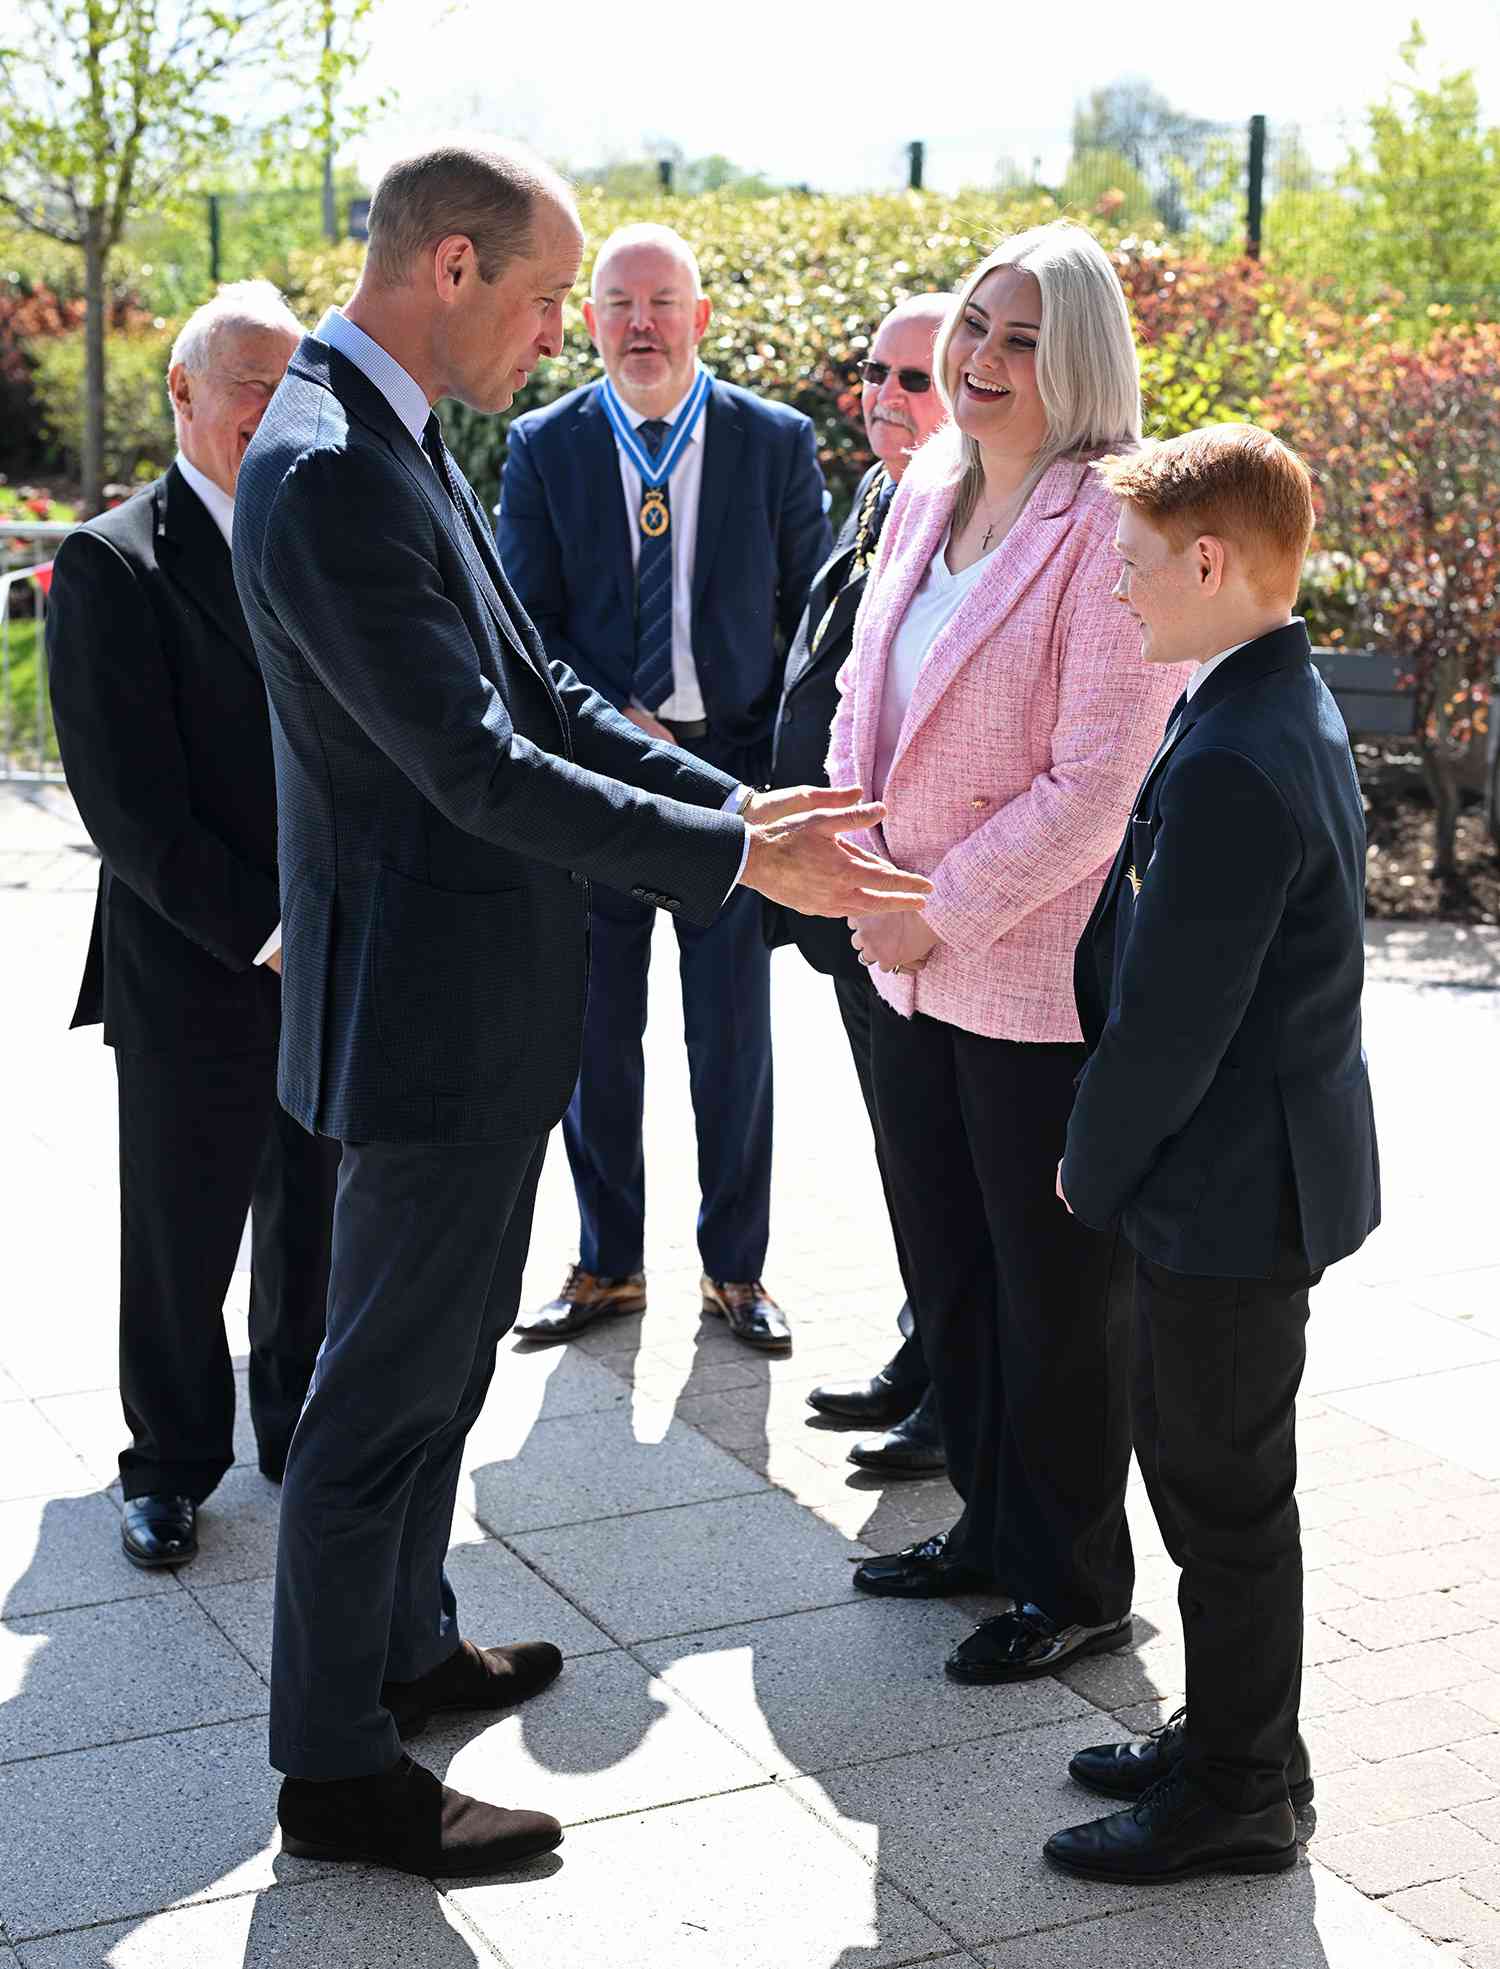 Prince William, Prince of Wales (L) speaks with twelve-year-old Freddie Hadley (R), who made the initial invitation to visit the school, during a visit to St. Michael's Church of England High School in Rowley Regis